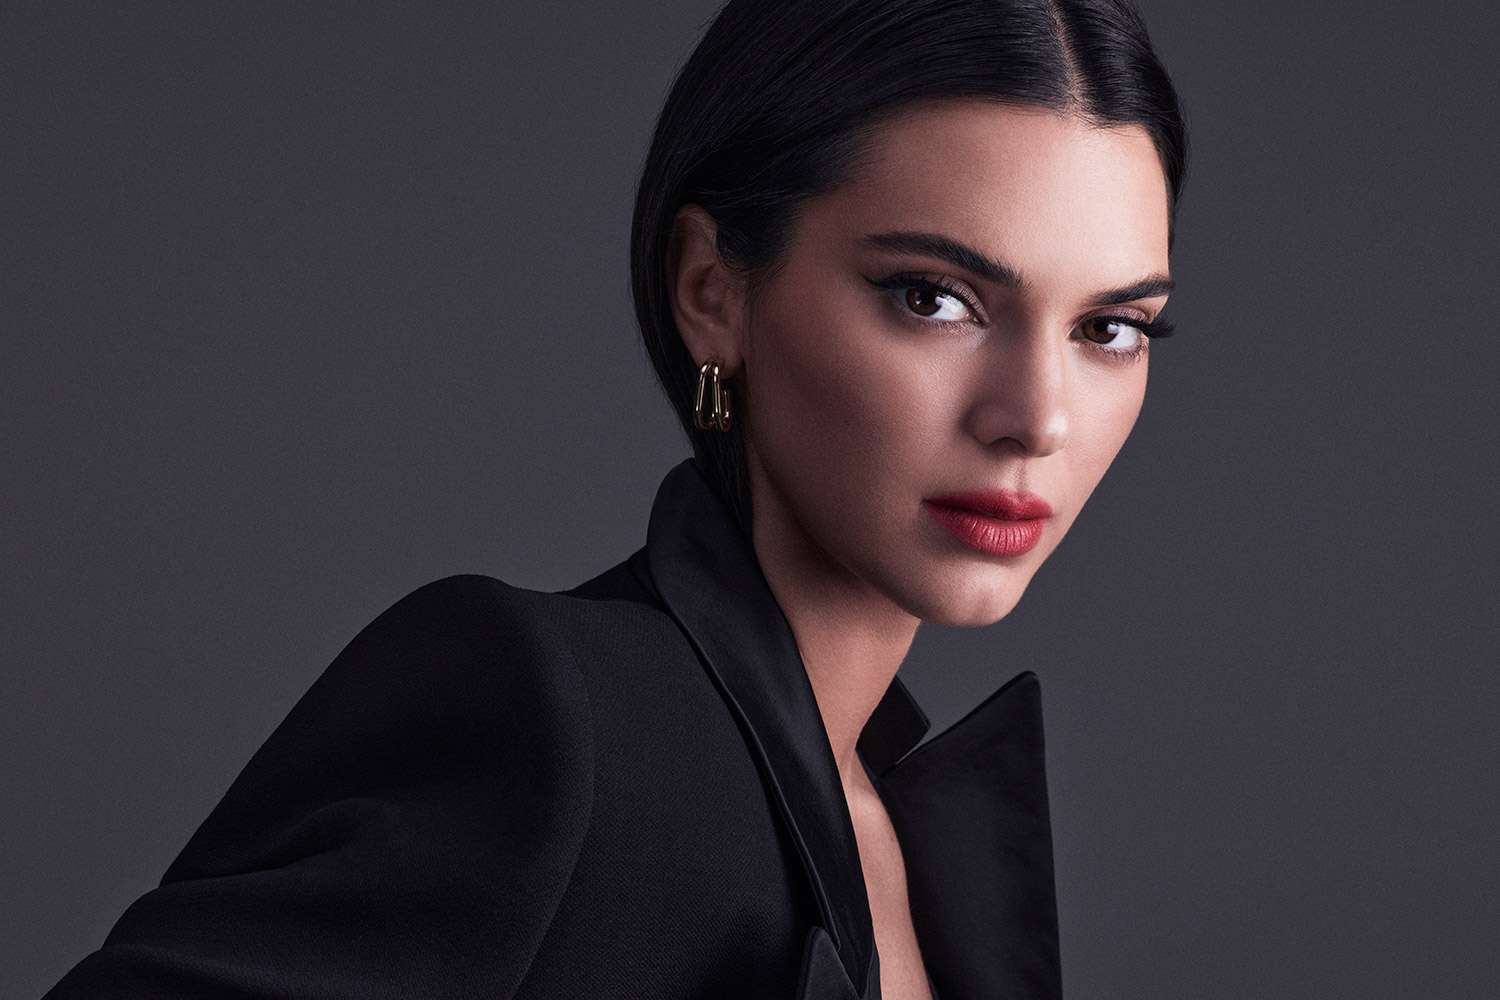 KENDALL JENNER IS THE NEW FACE OF L’OREAL